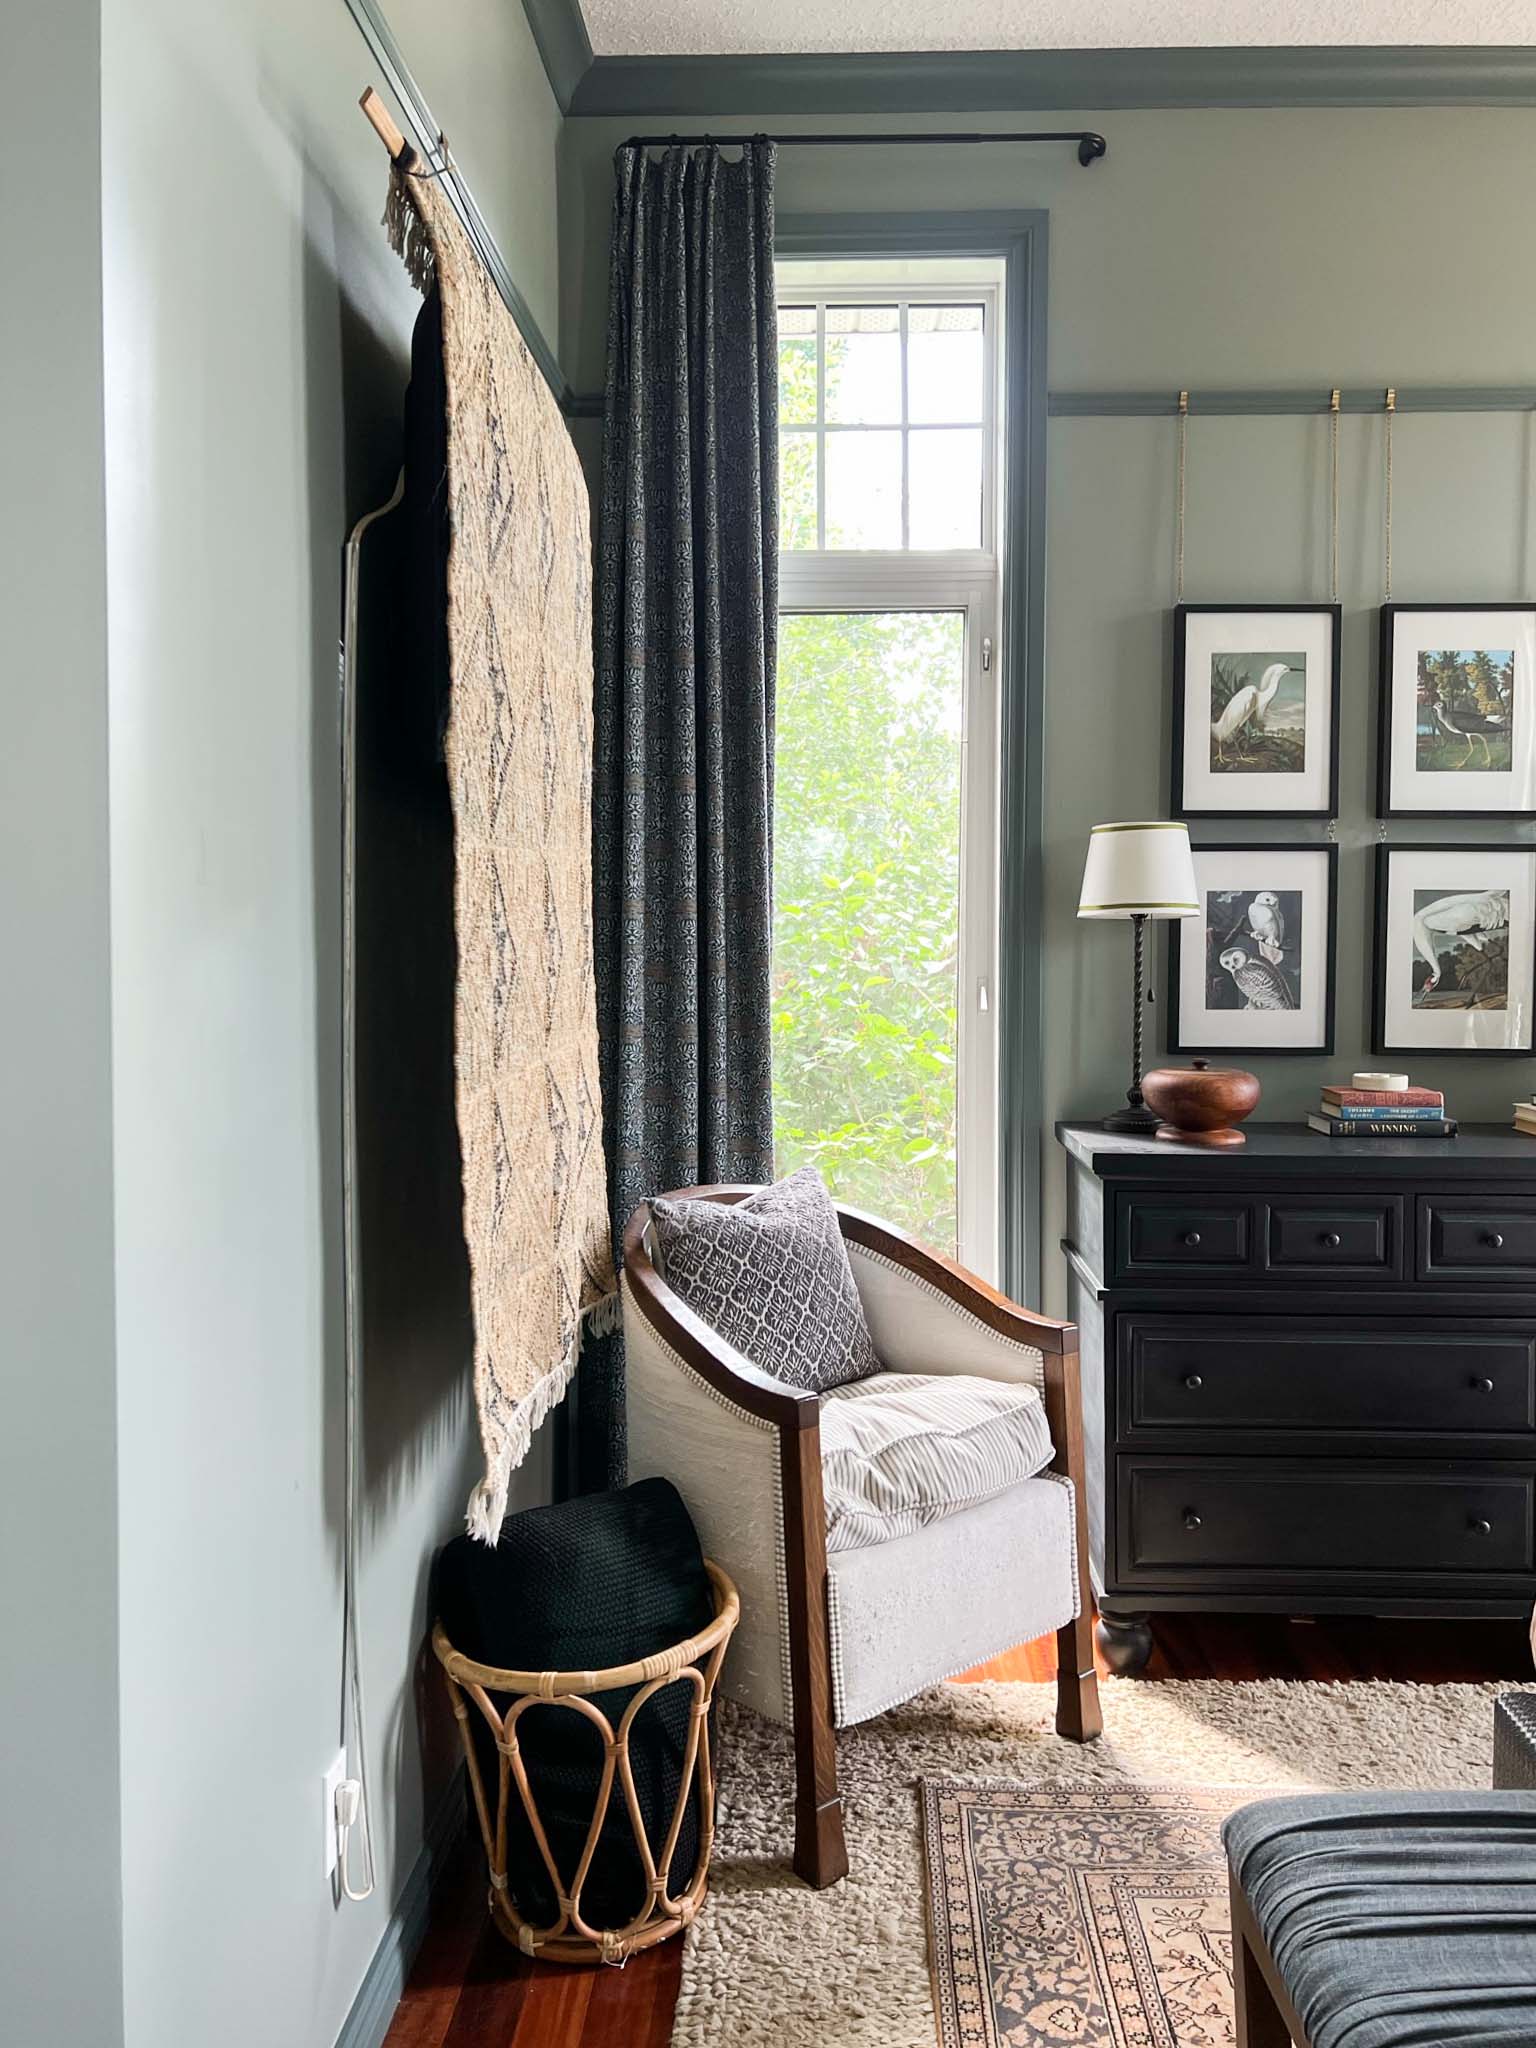 Viewing the rug hanging from the side where you can see the TV slightly.  Also can see a vintage layered rug, antique chair, basket with pillows, black dresser, long narrow window with floral curtains, green walls with dark green contrast trim.